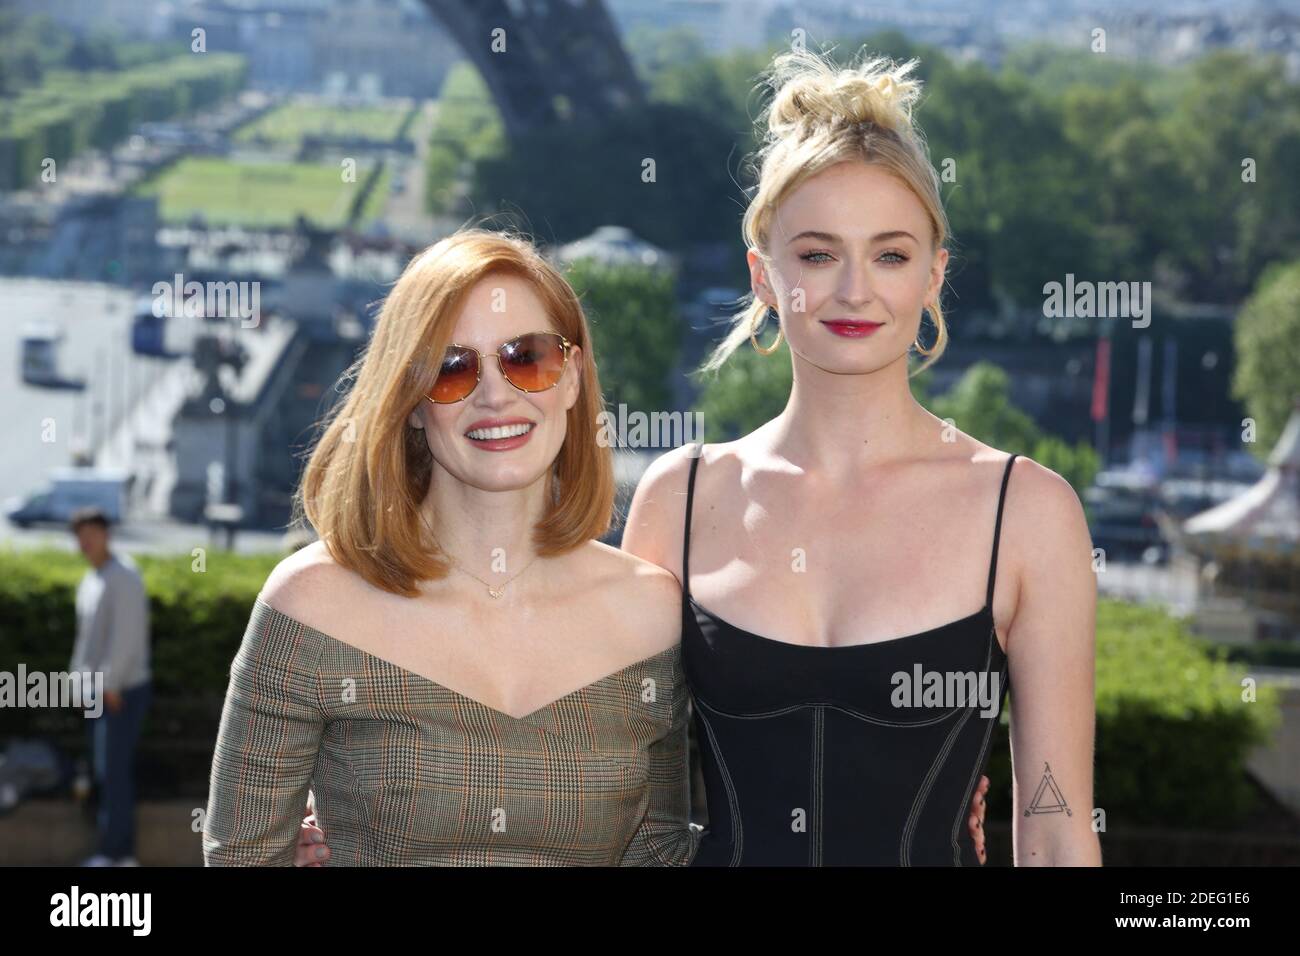 Jessica Chastain and Sophie Turner during a photocall to present the movie  'X-Men - Dark Phoenix' by Simon Kinberg held at the Cafe de l'Homme, Place  du Trocadero in Paris, France on